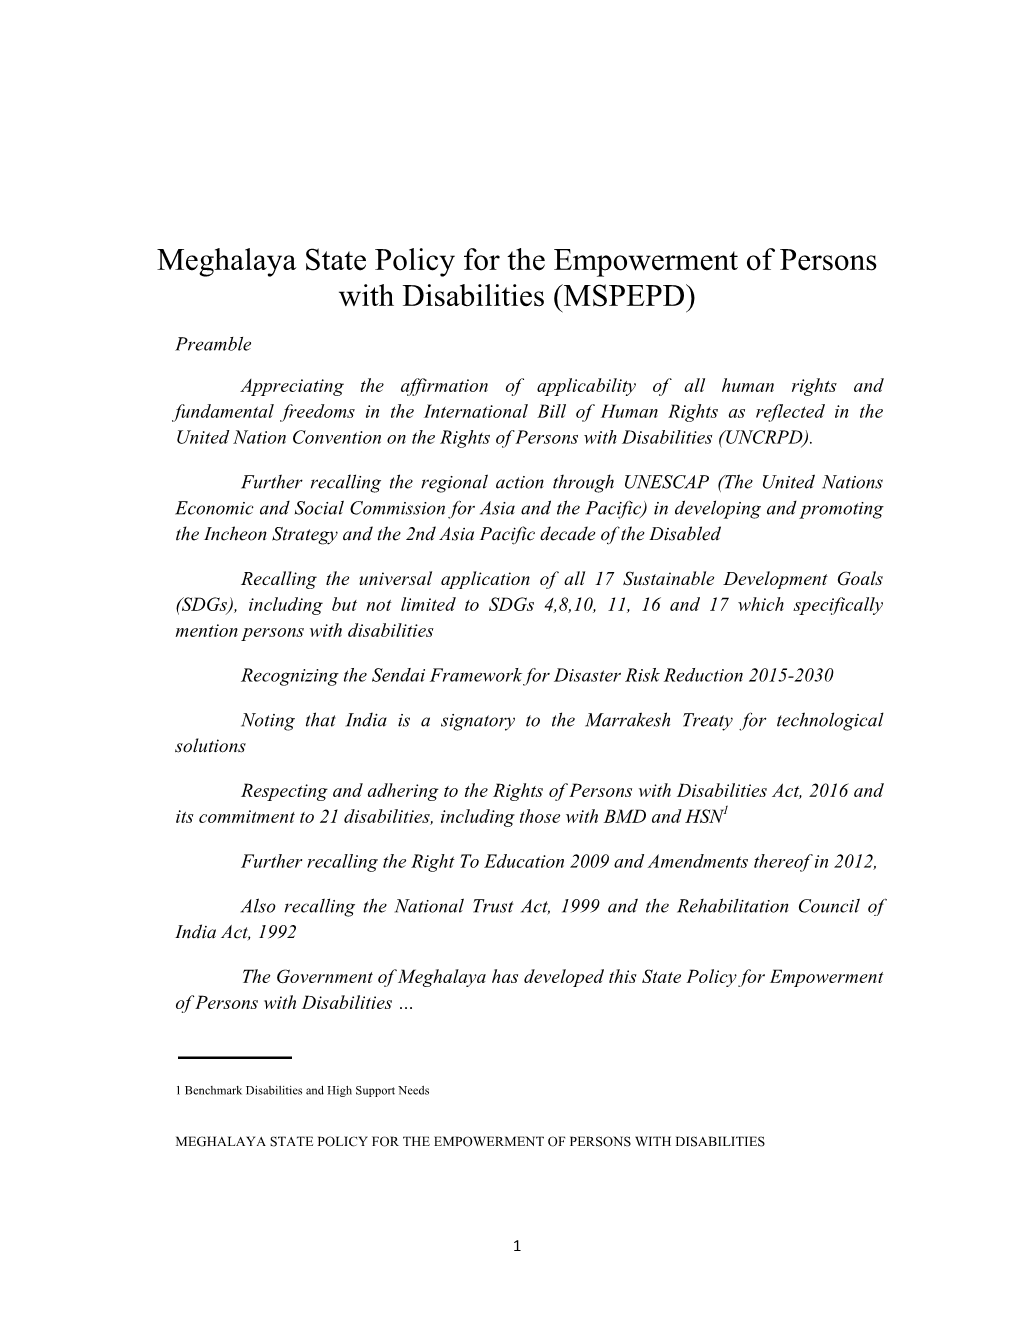 Meghalaya State Policy for the Empowerment of Persons with Disabilities (MSPEPD)